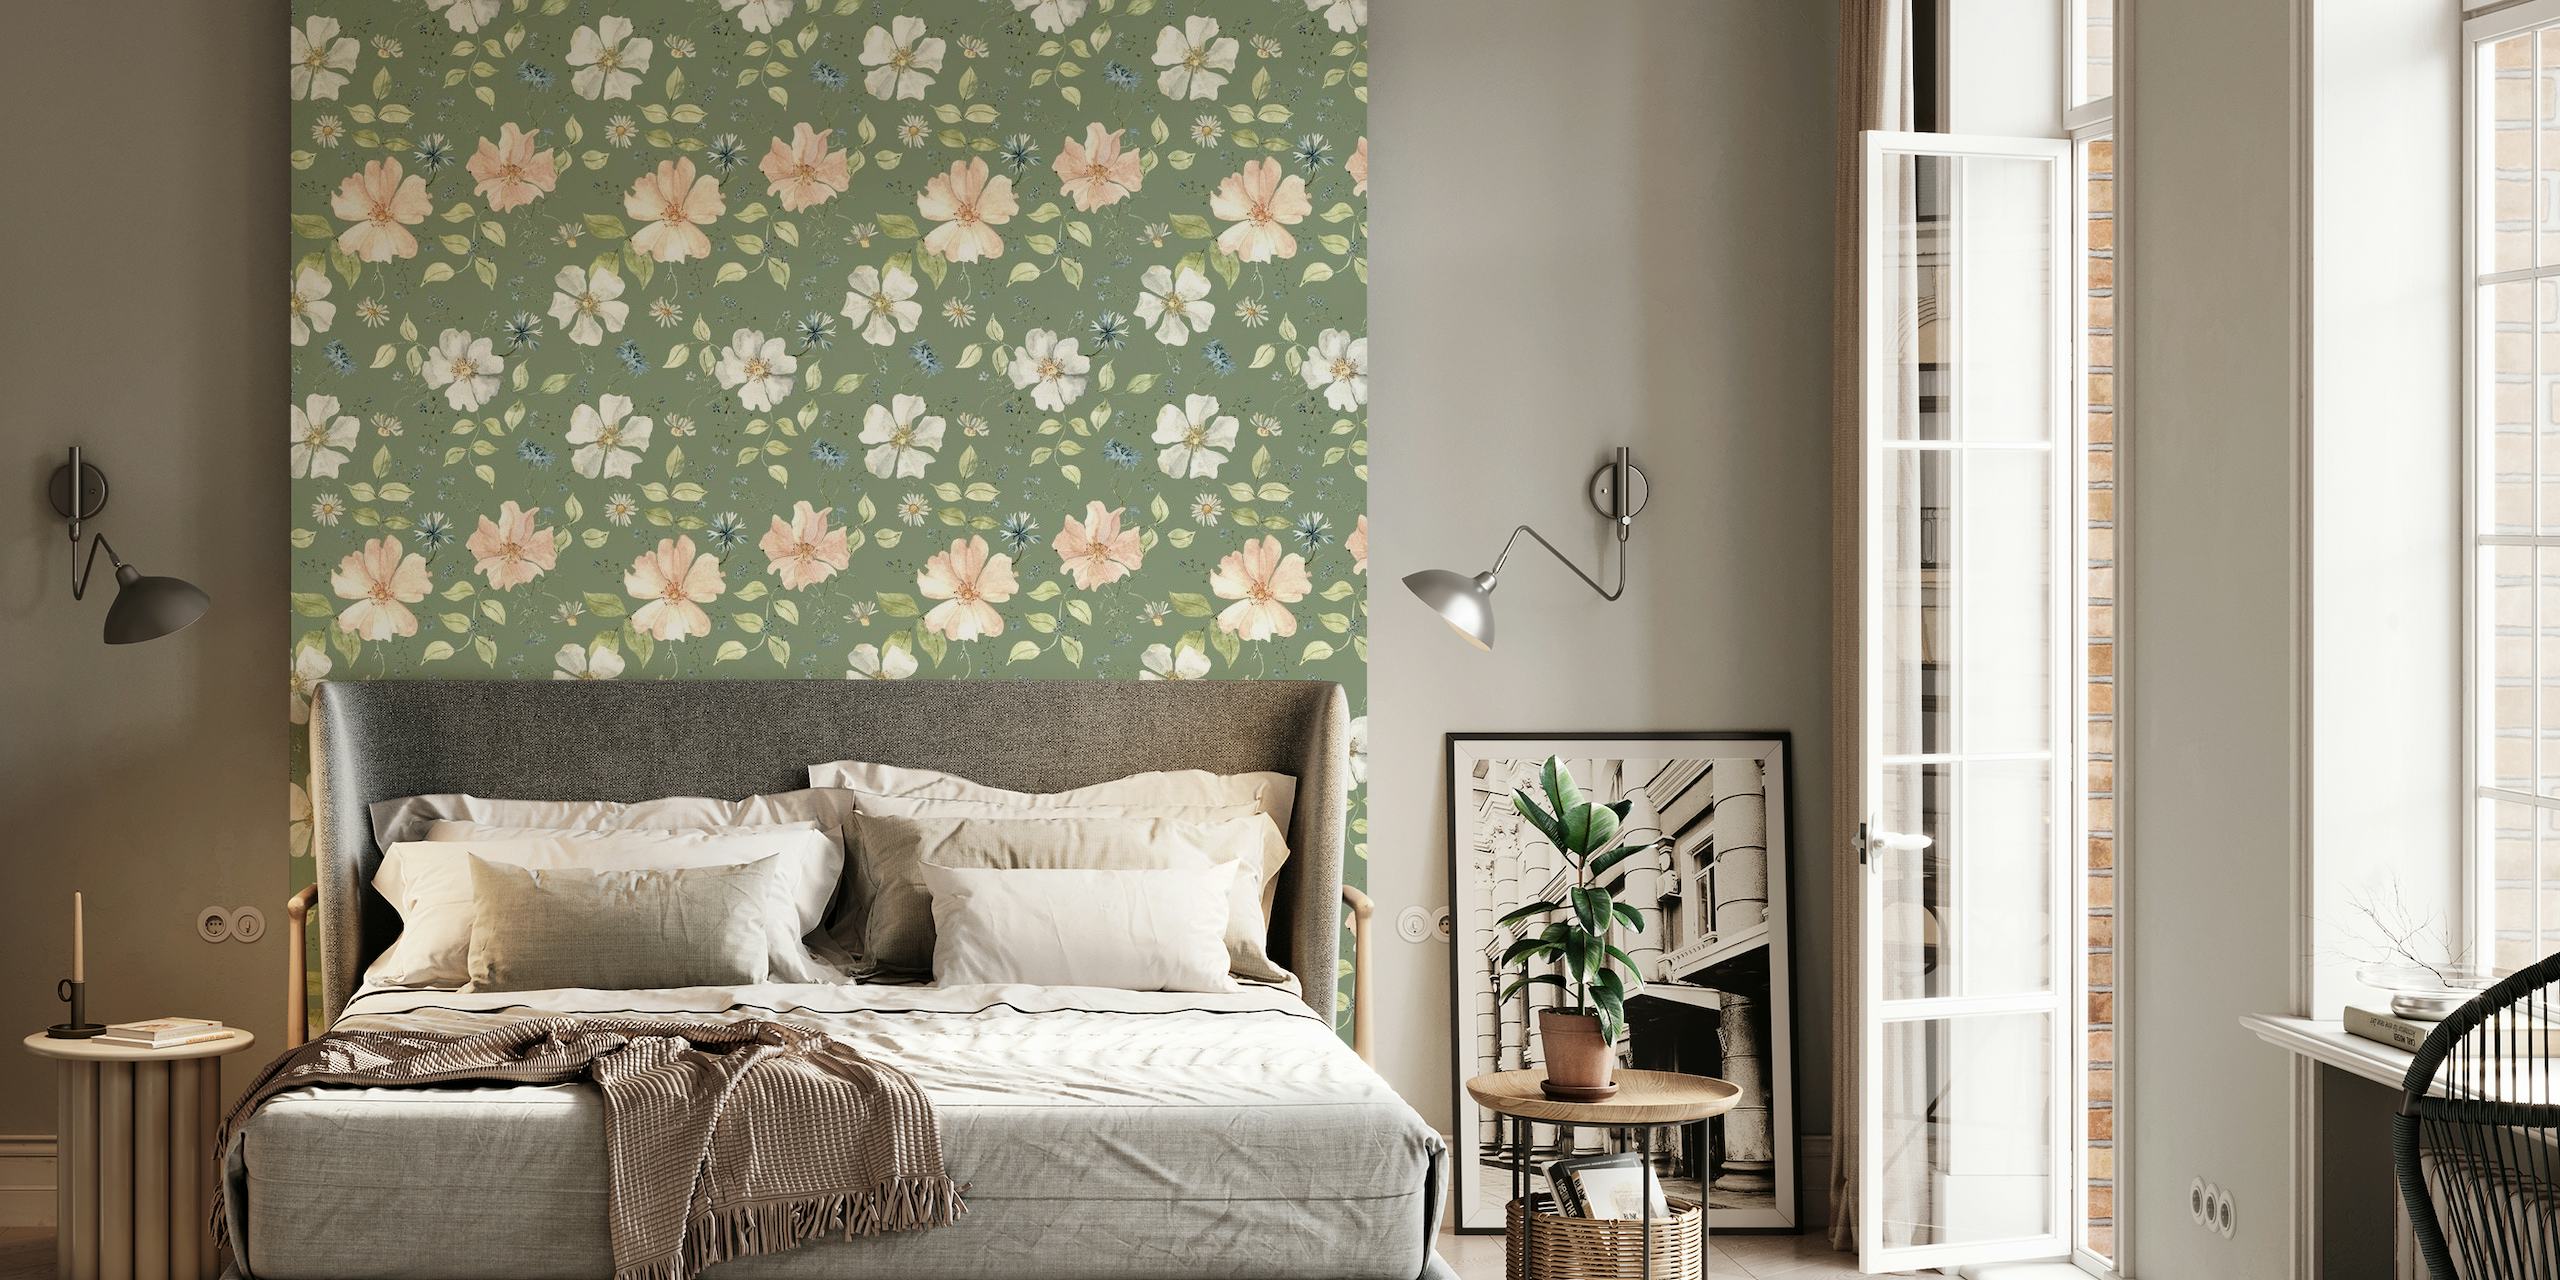 Idyllic and Floral Green wall mural with delicate flowers on a soothing green background